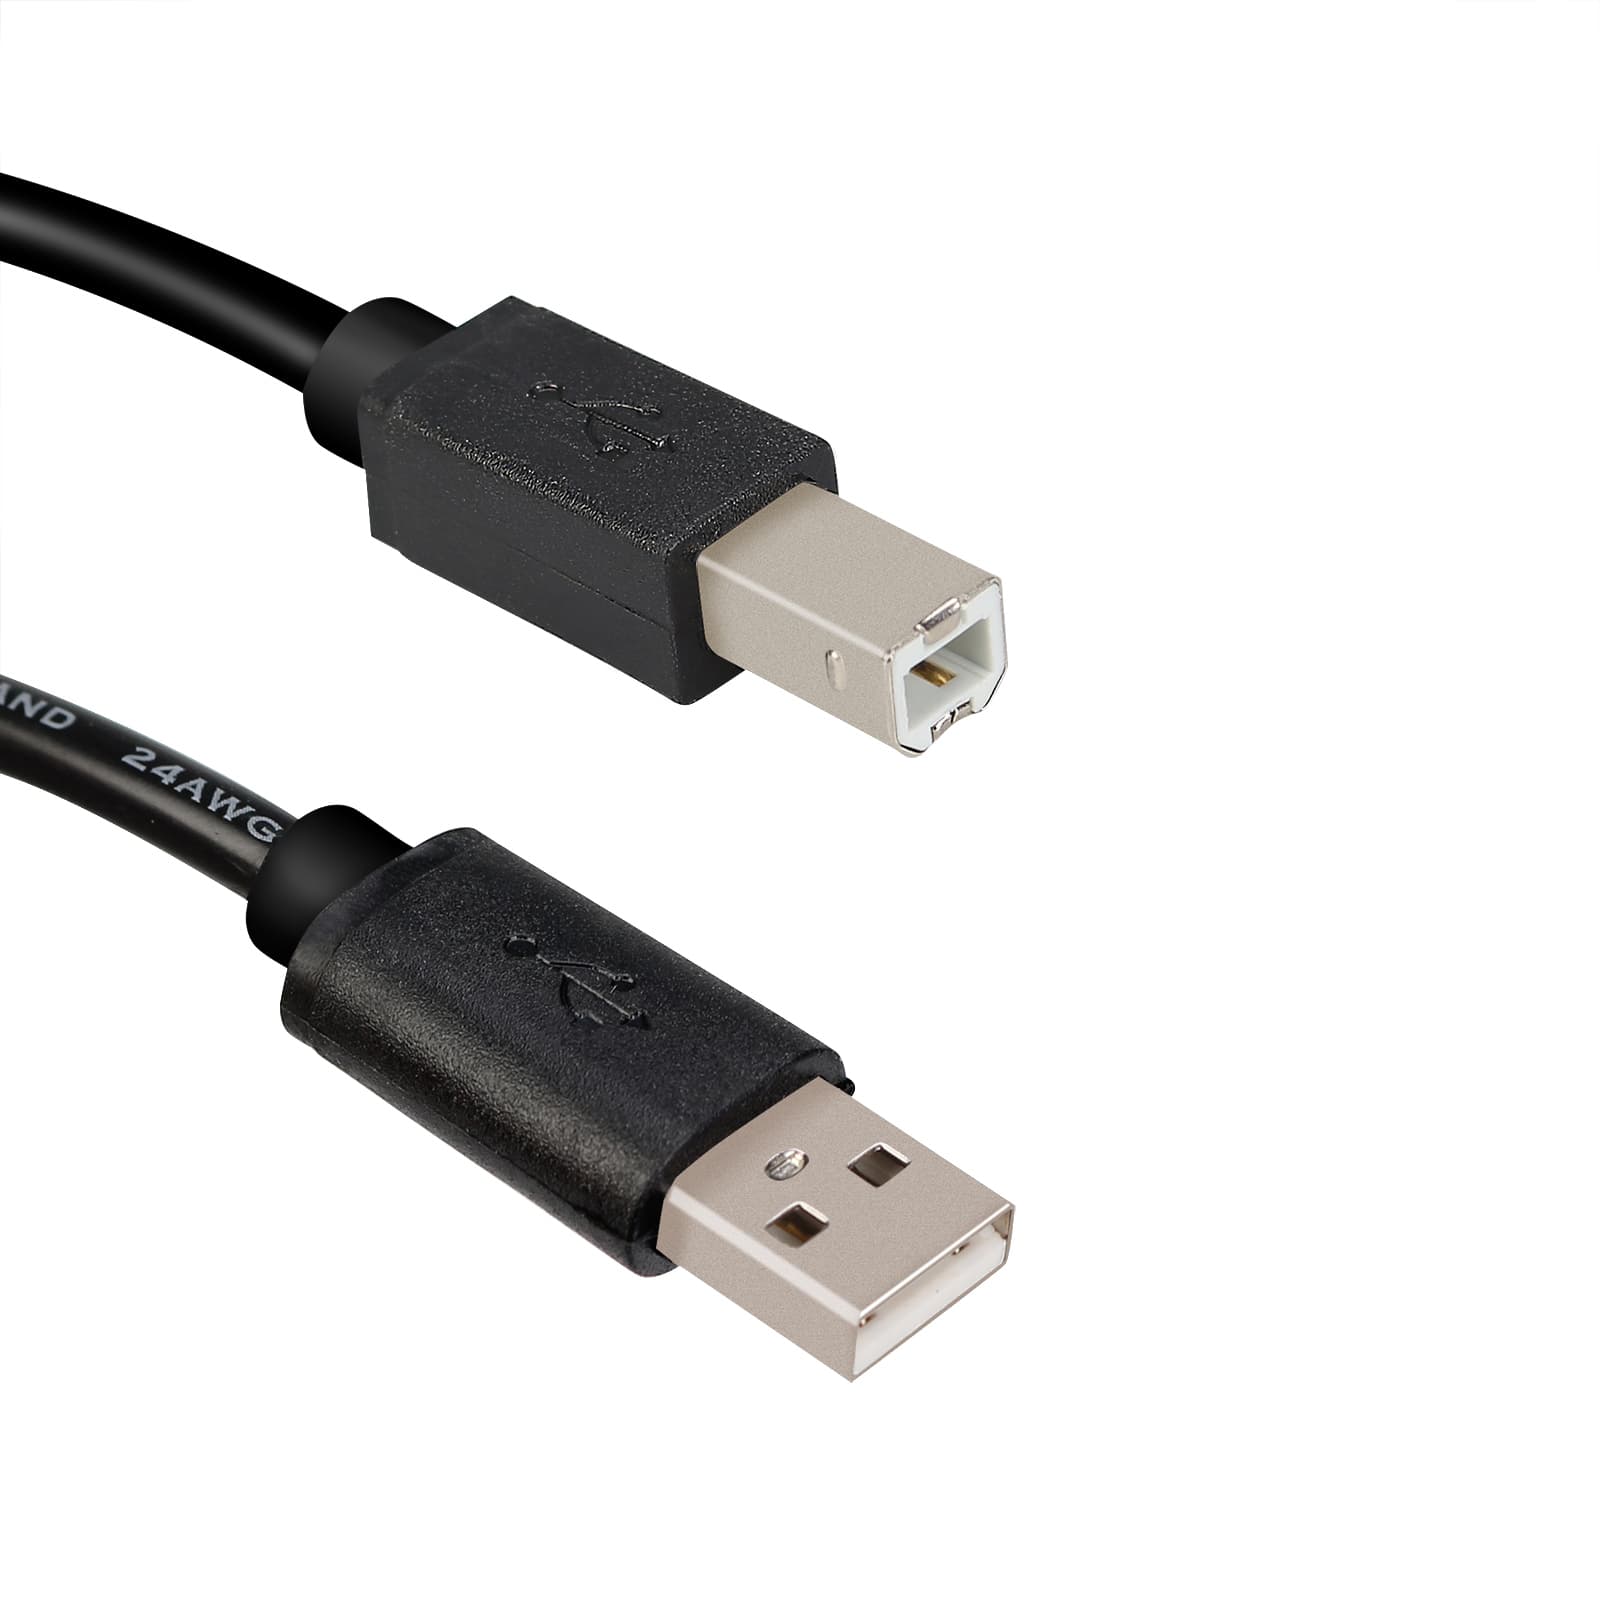 PC74 USB Programming Cable for Retevis RT74 RT92